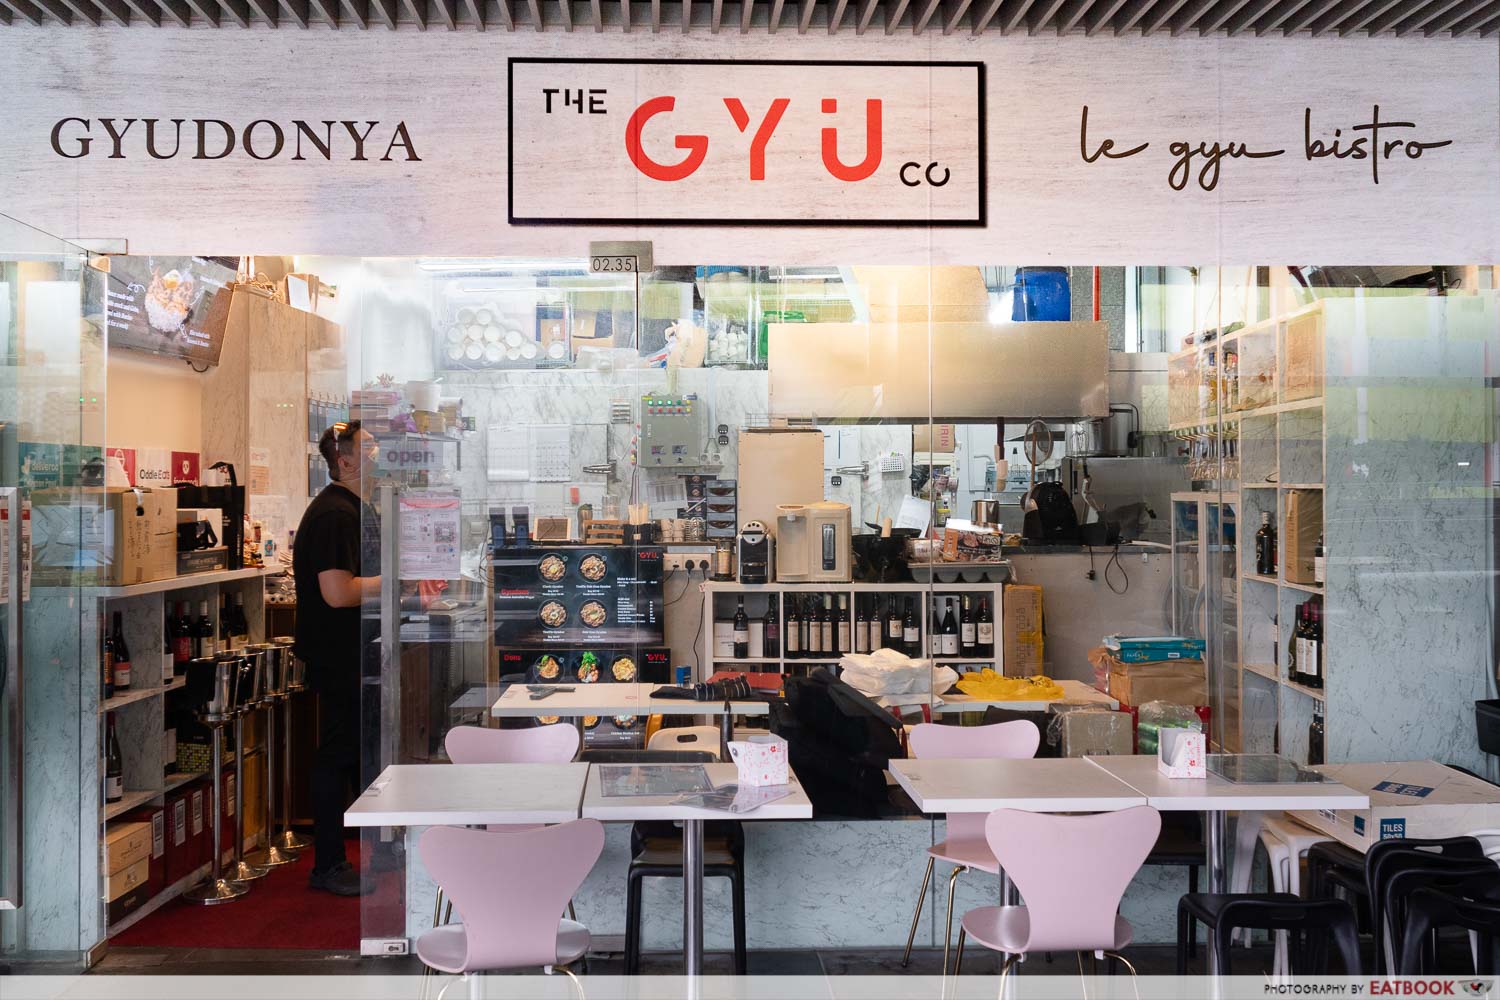 the gyu co - storefront